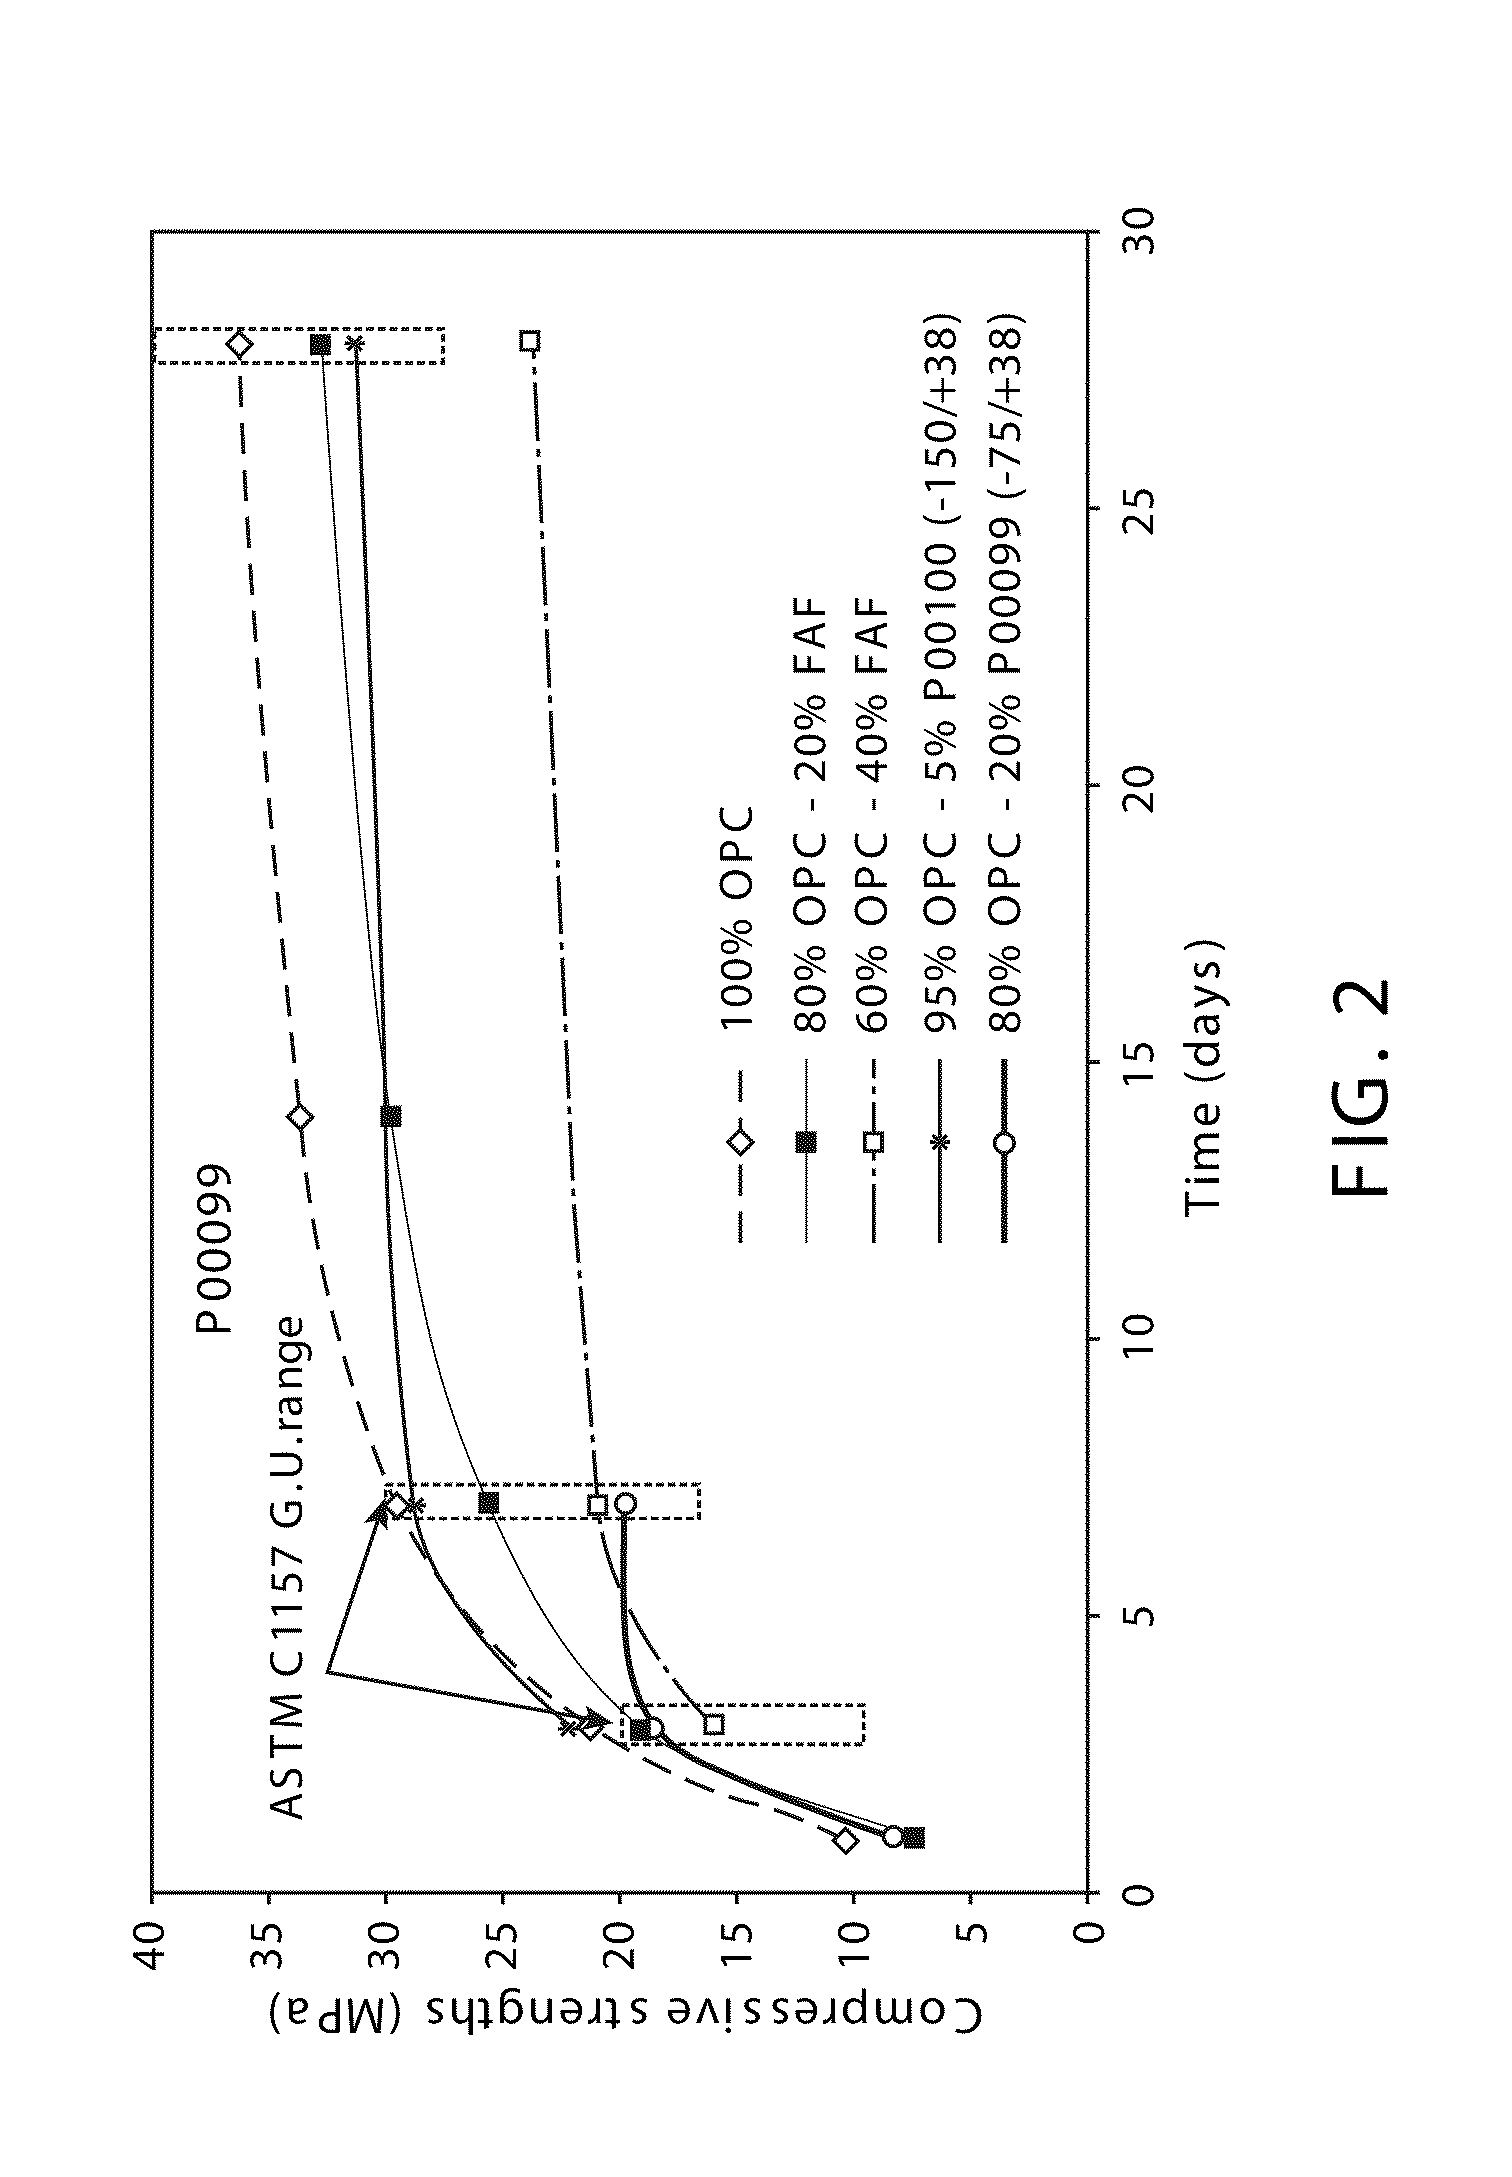 Desalination methods and systems that include carbonate compound precipitation